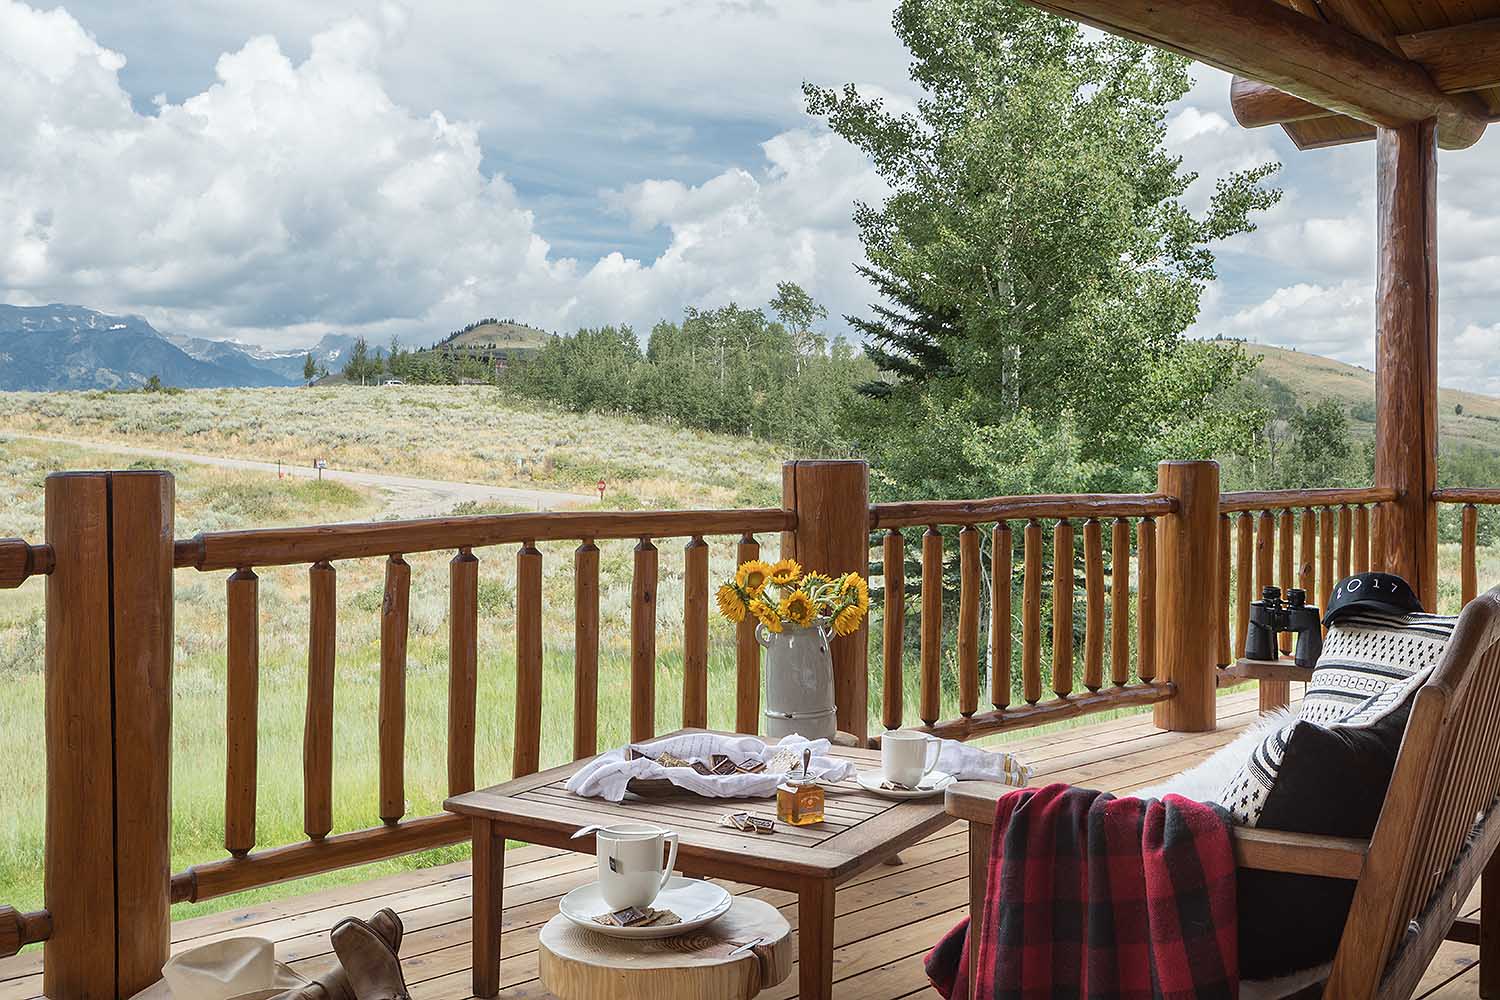 Gros Ventre Lodging in Jackson Hole